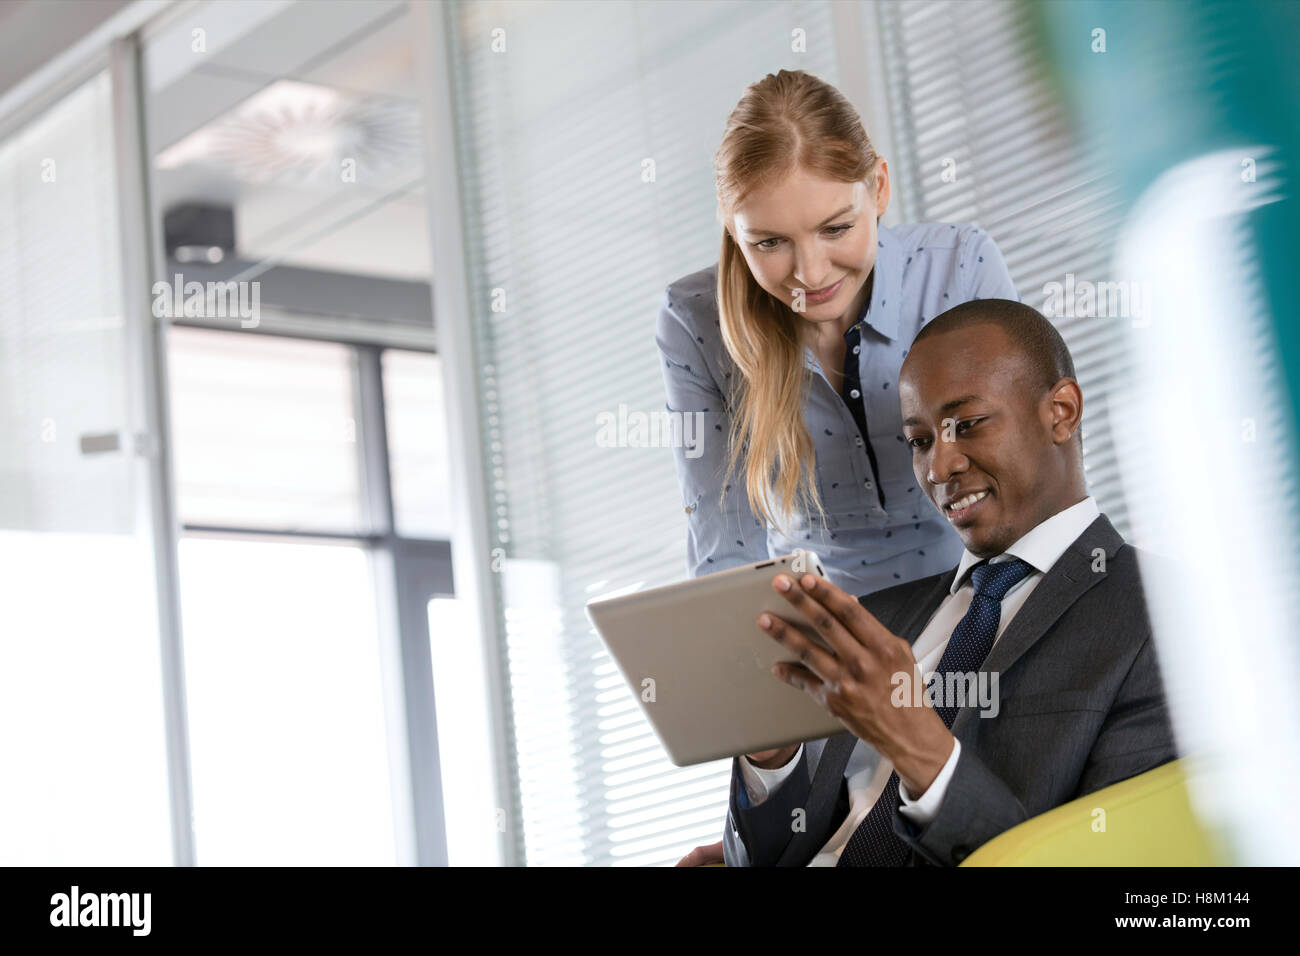 Smiling young businesswoman with male colleague using digital tablet in office Banque D'Images